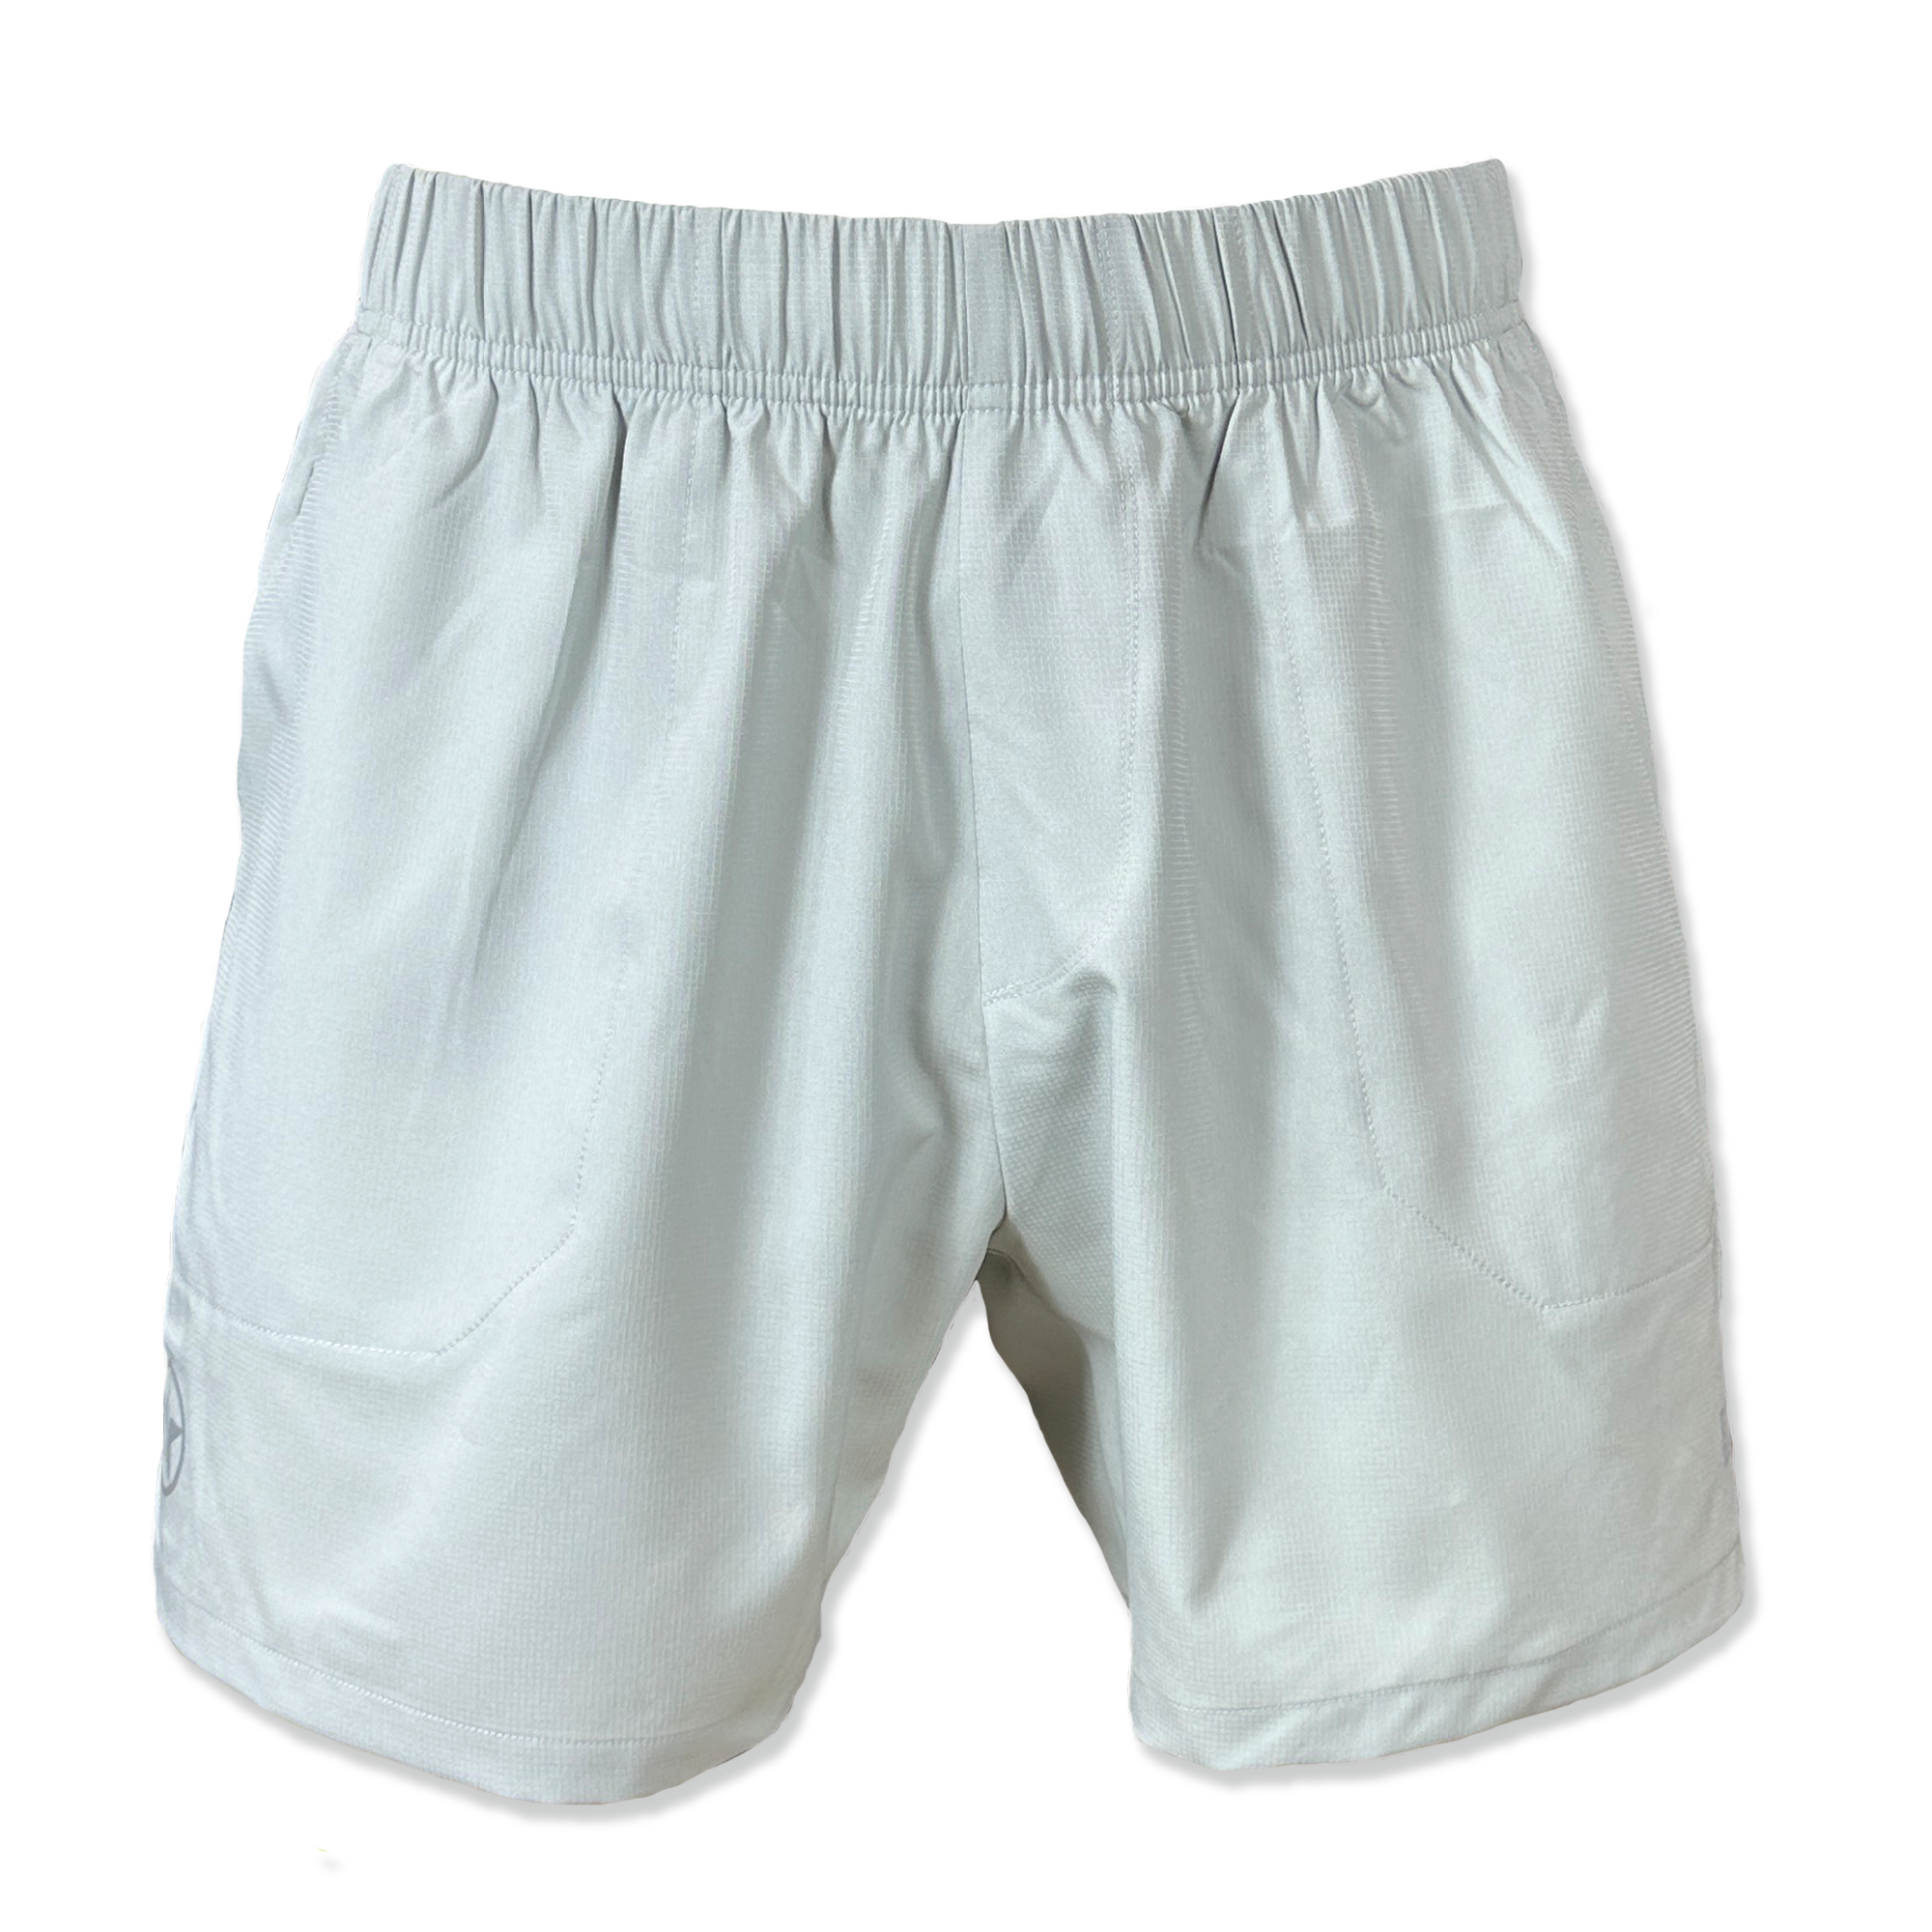 Men's Shorts - Competition 3.0 - Platinum - Savage Barbell Apparel